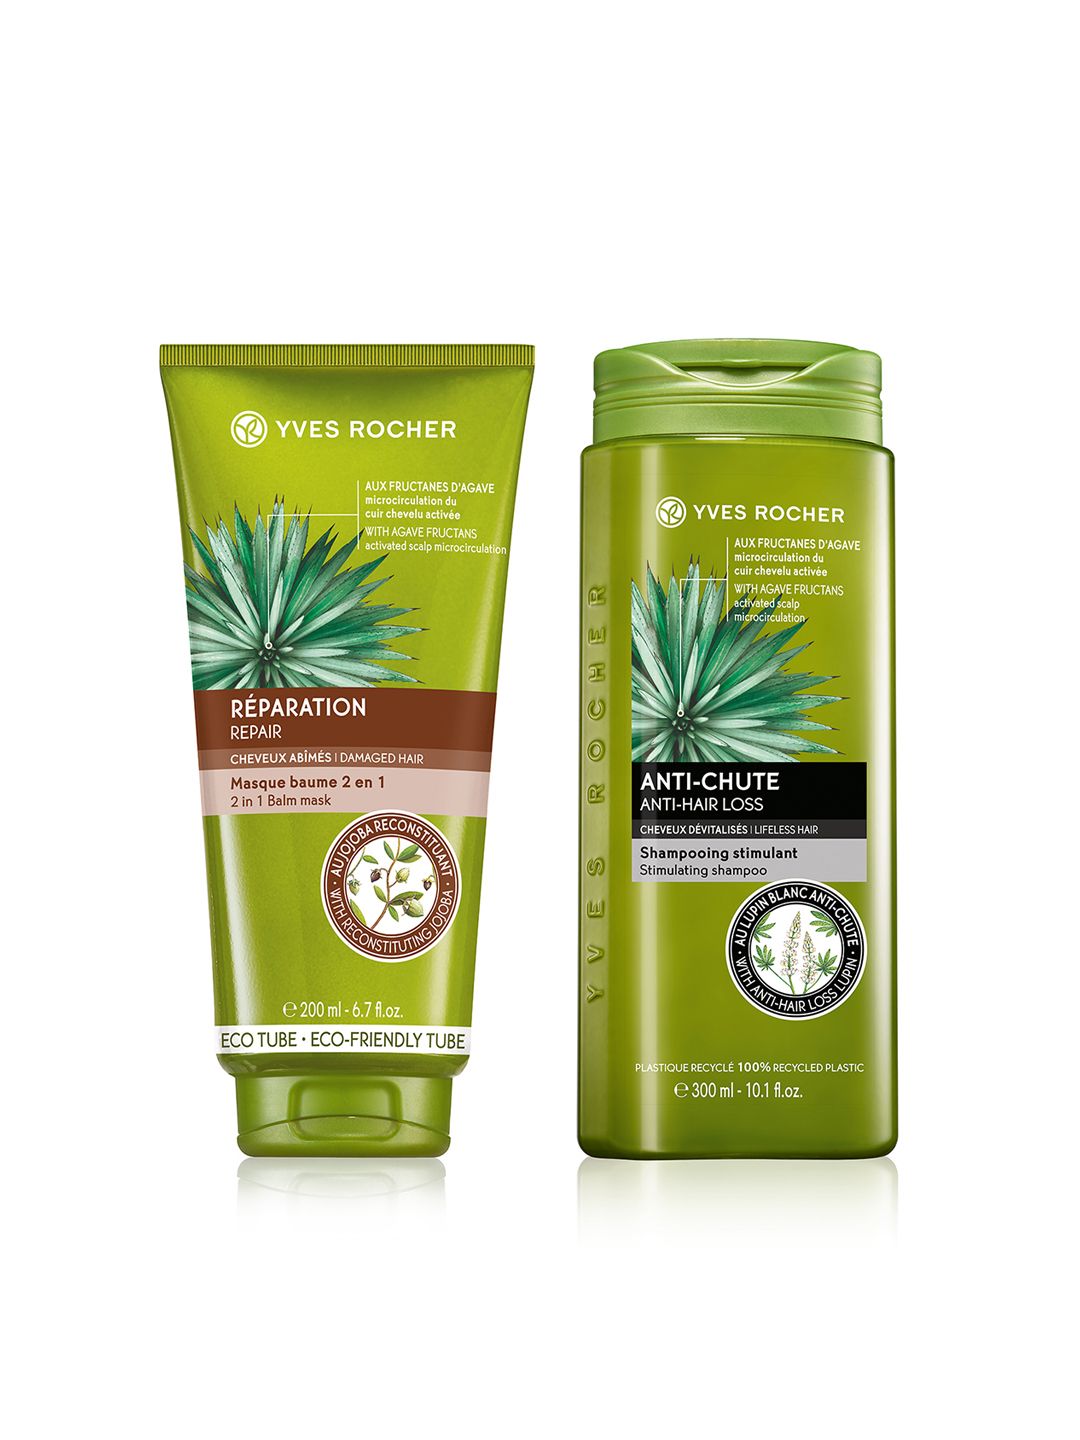 YVES ROCHER Set of Sustainable Shampoo & Balm Mask Price in India